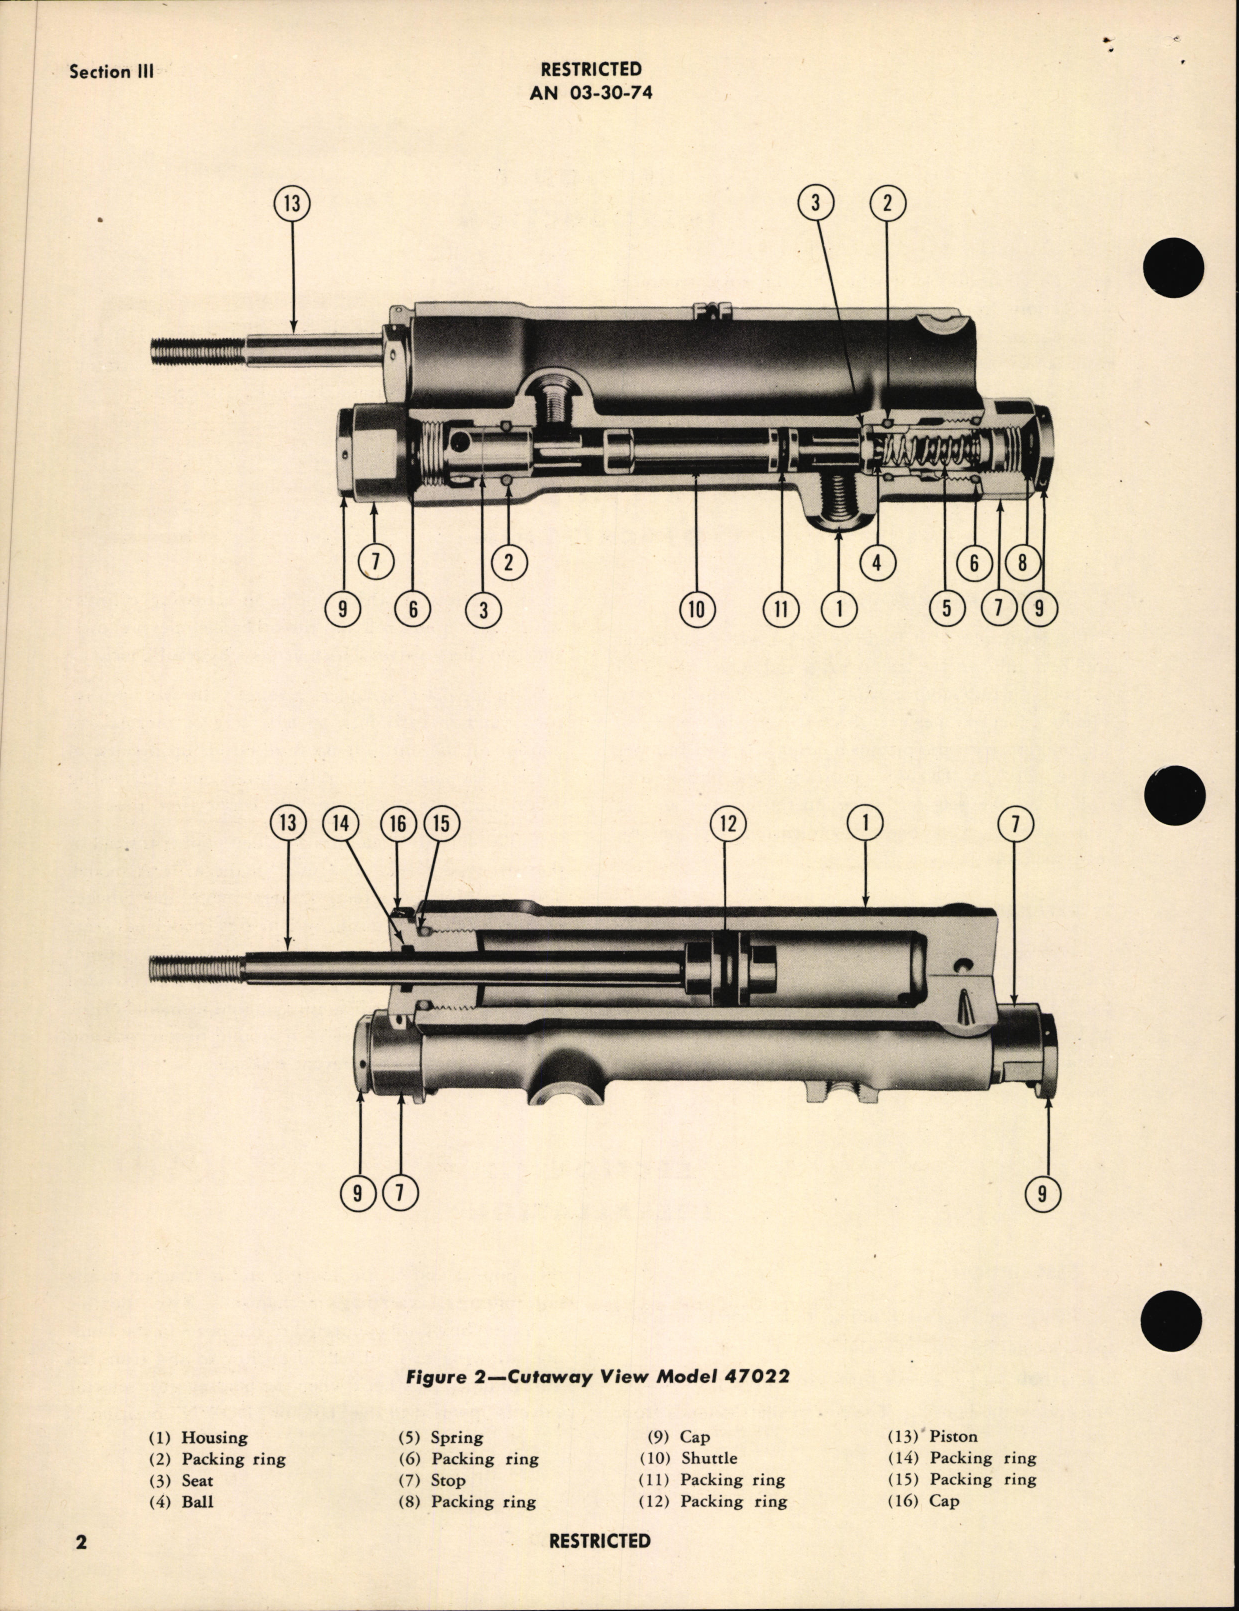 Sample page 6 from AirCorps Library document: Handbook of Instructions with Parts Catalog for Tail Bumper Jack Lock